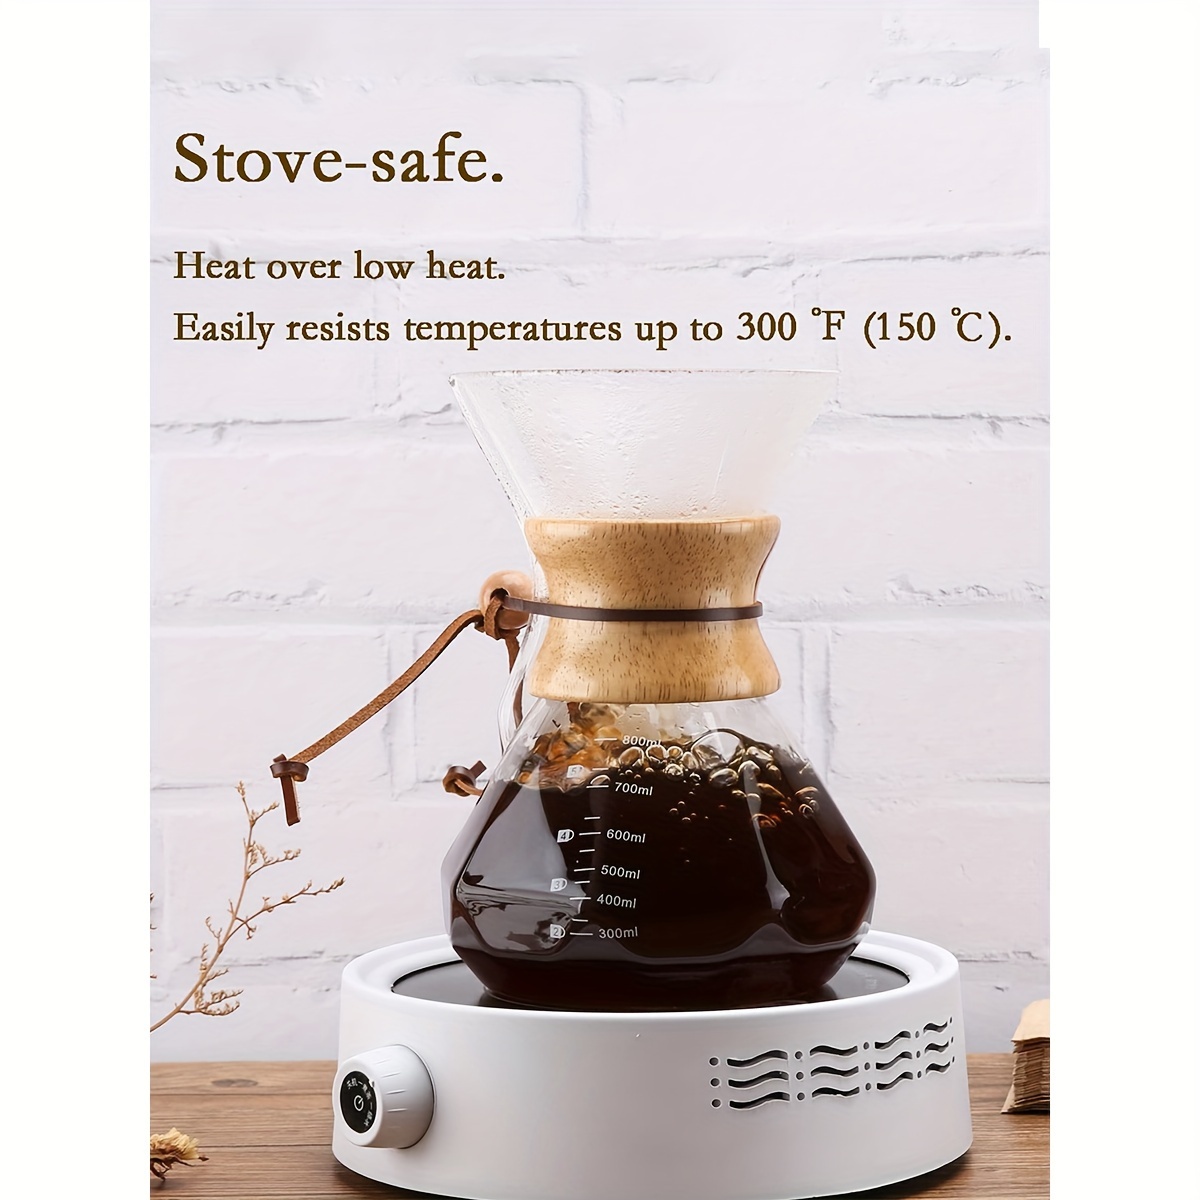 Hario V60 Glass Hot and Iced Coffee Maker, 700ml, Clear